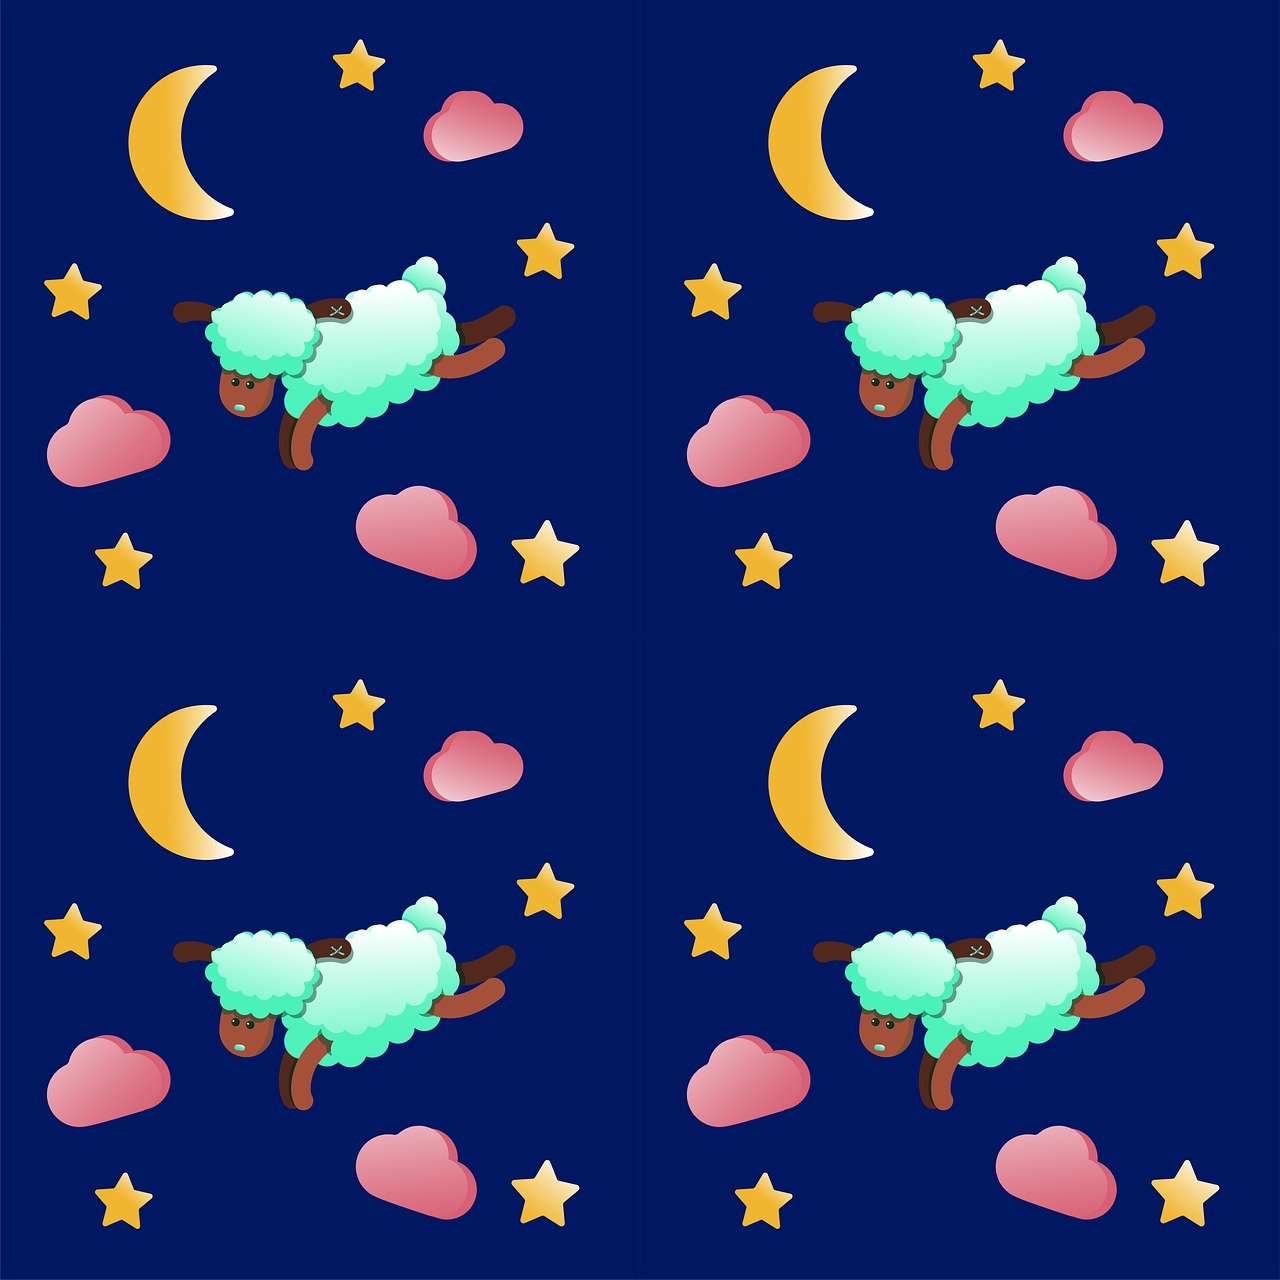 a pattern of sheep and stars on a blue background, by Sailor Moon, tumblr, naive art, flying trees and park items, tileable, goodnight, satin